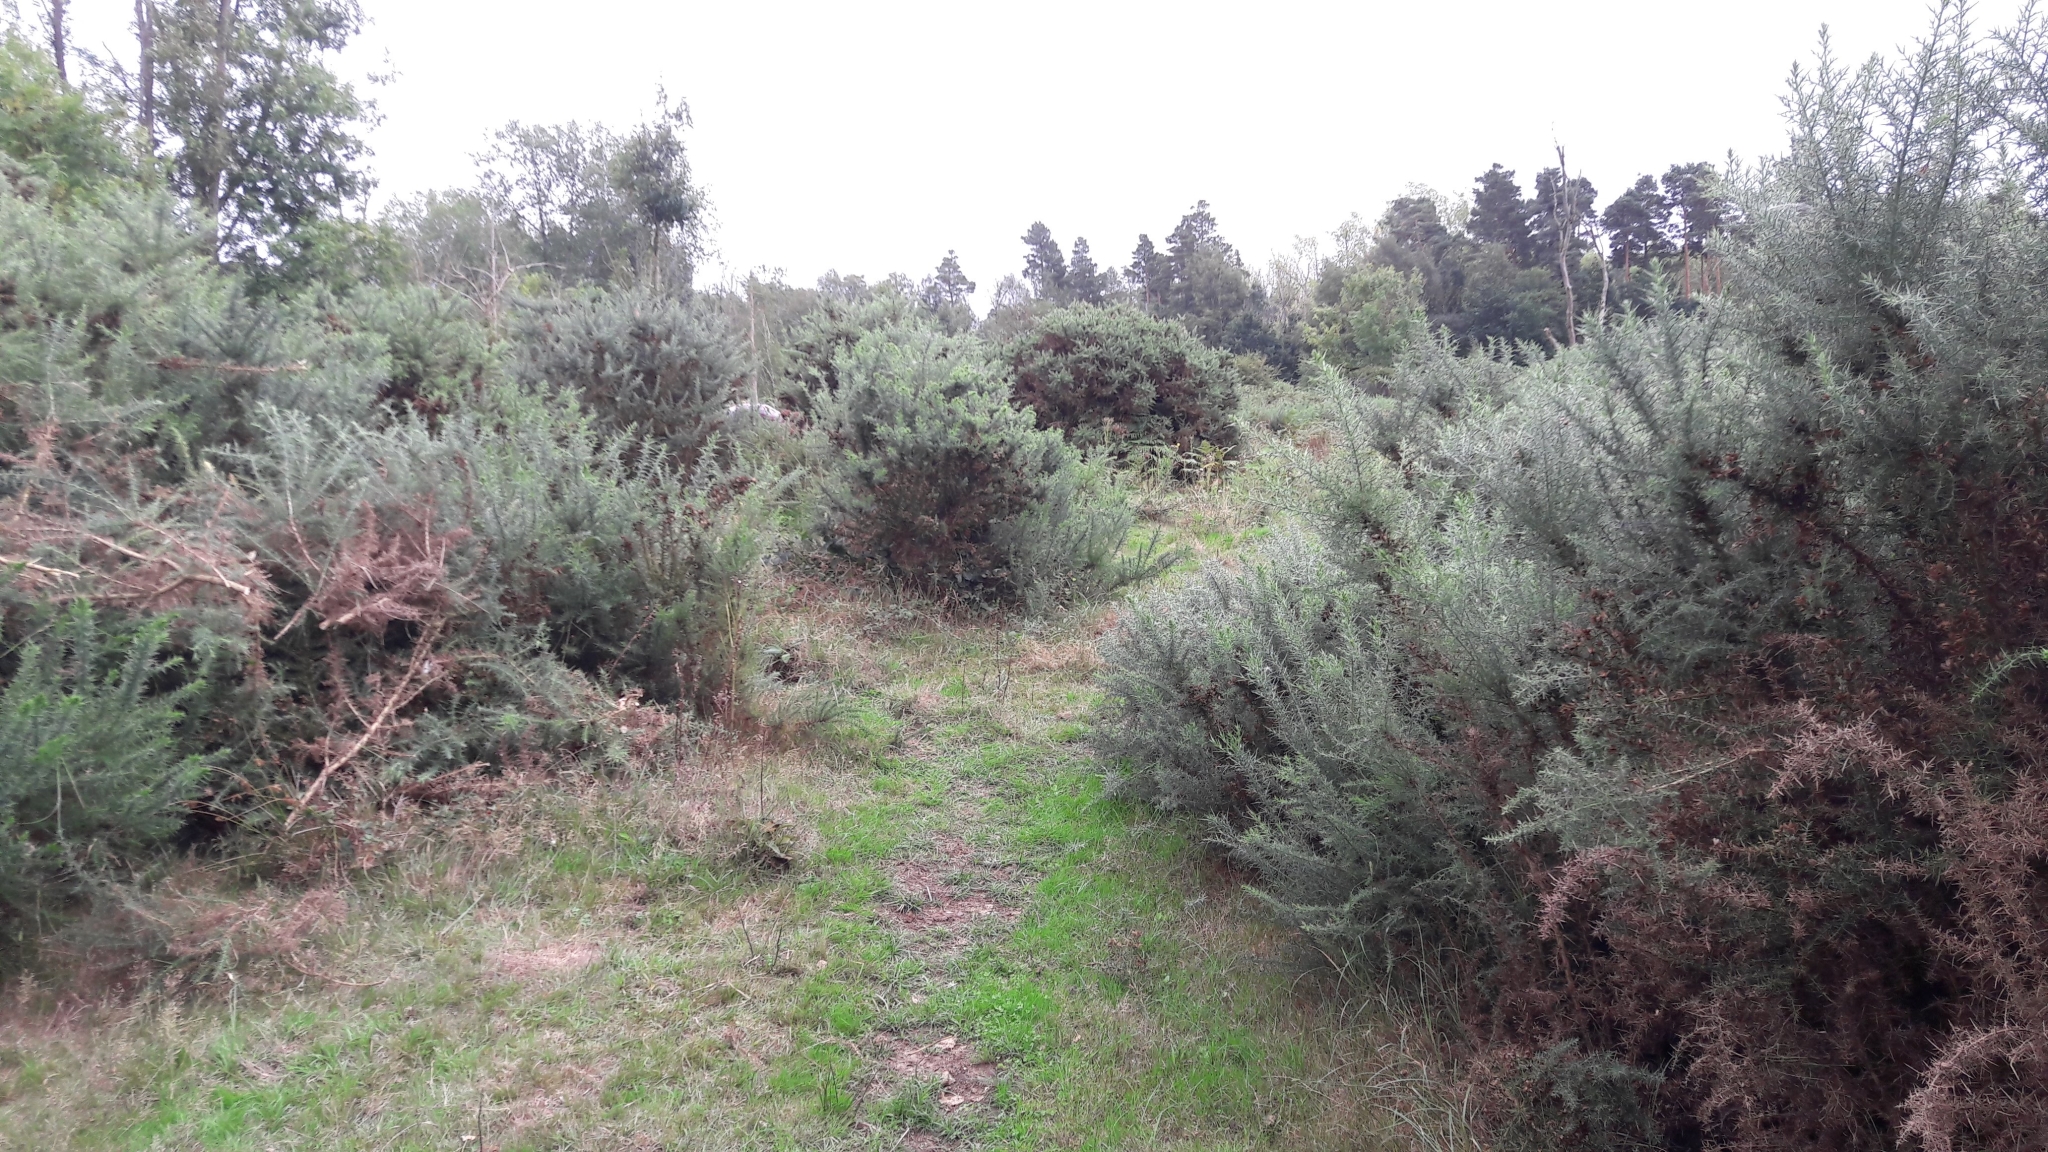 A photo from the FoTF Conservation Event - August 2018 - Gorse Removal at Hockham Hills & Holes : Gorse bushes at the work site